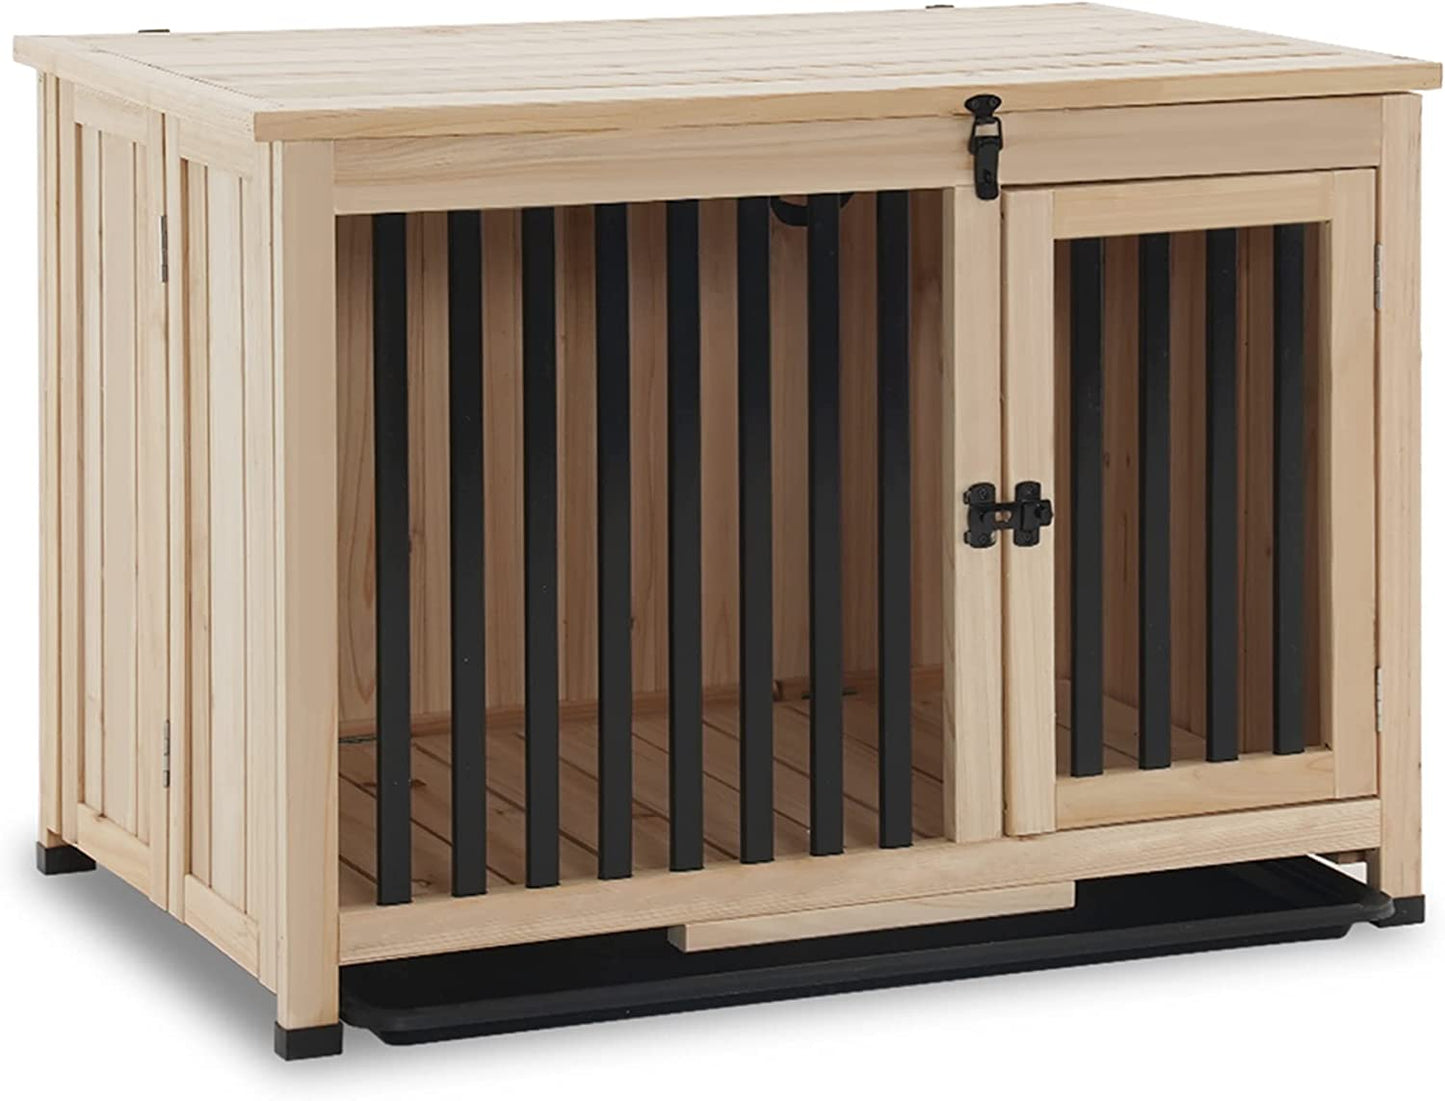 Mcombo Wooden Dog Crate Furniture, 33" Dog Kennel Pet House End Table, Solid Wood Portable Foldable Indoor Cage for Small/Medium Dogs, No Assembly Needed